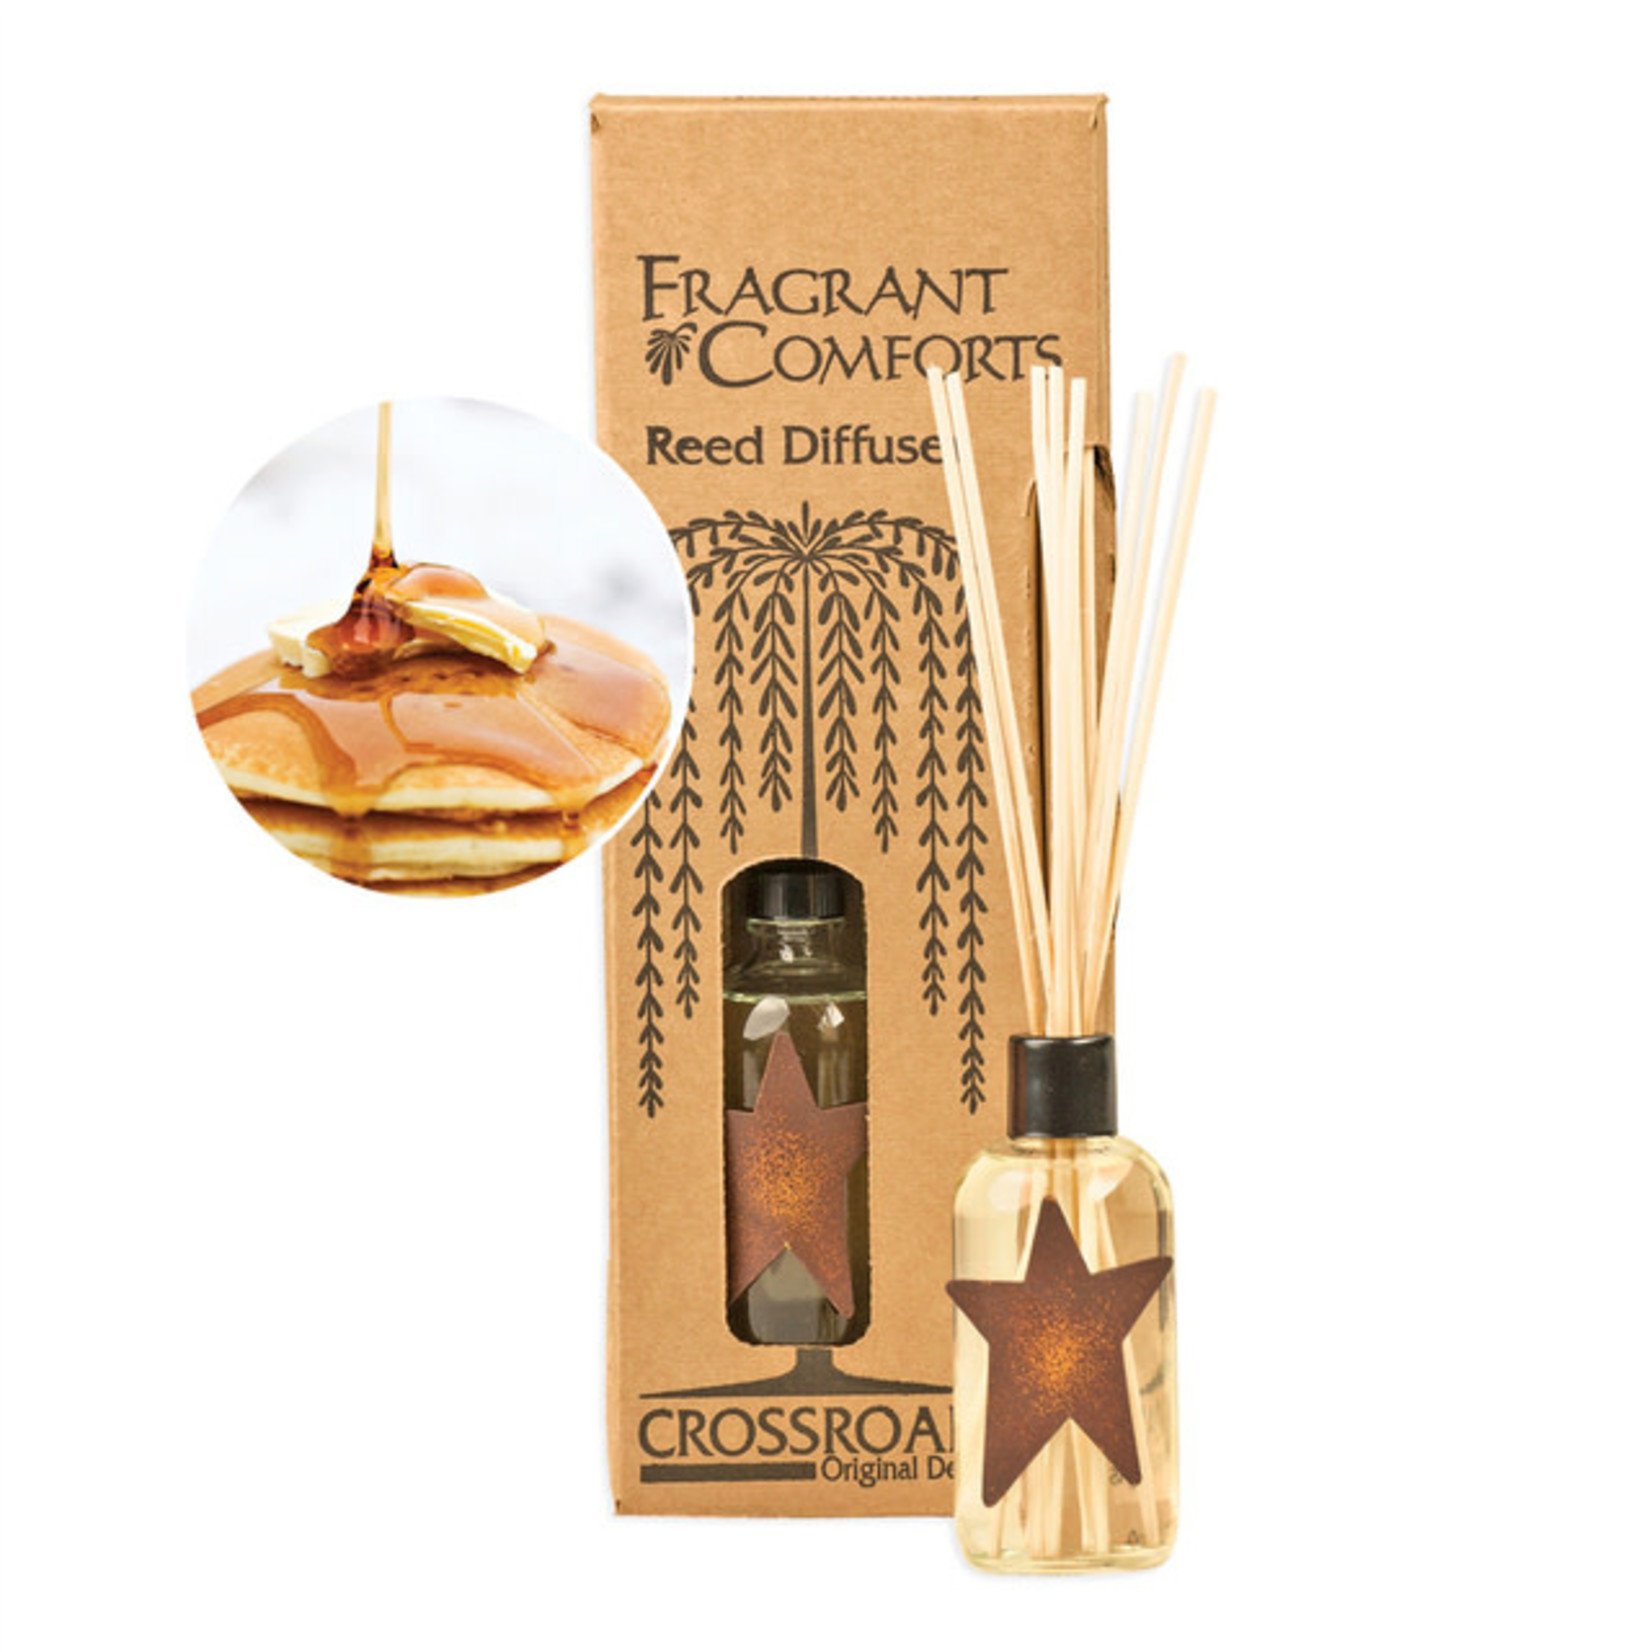 Crossroads Buttered Maple Syrup Reed Diffuser Kit